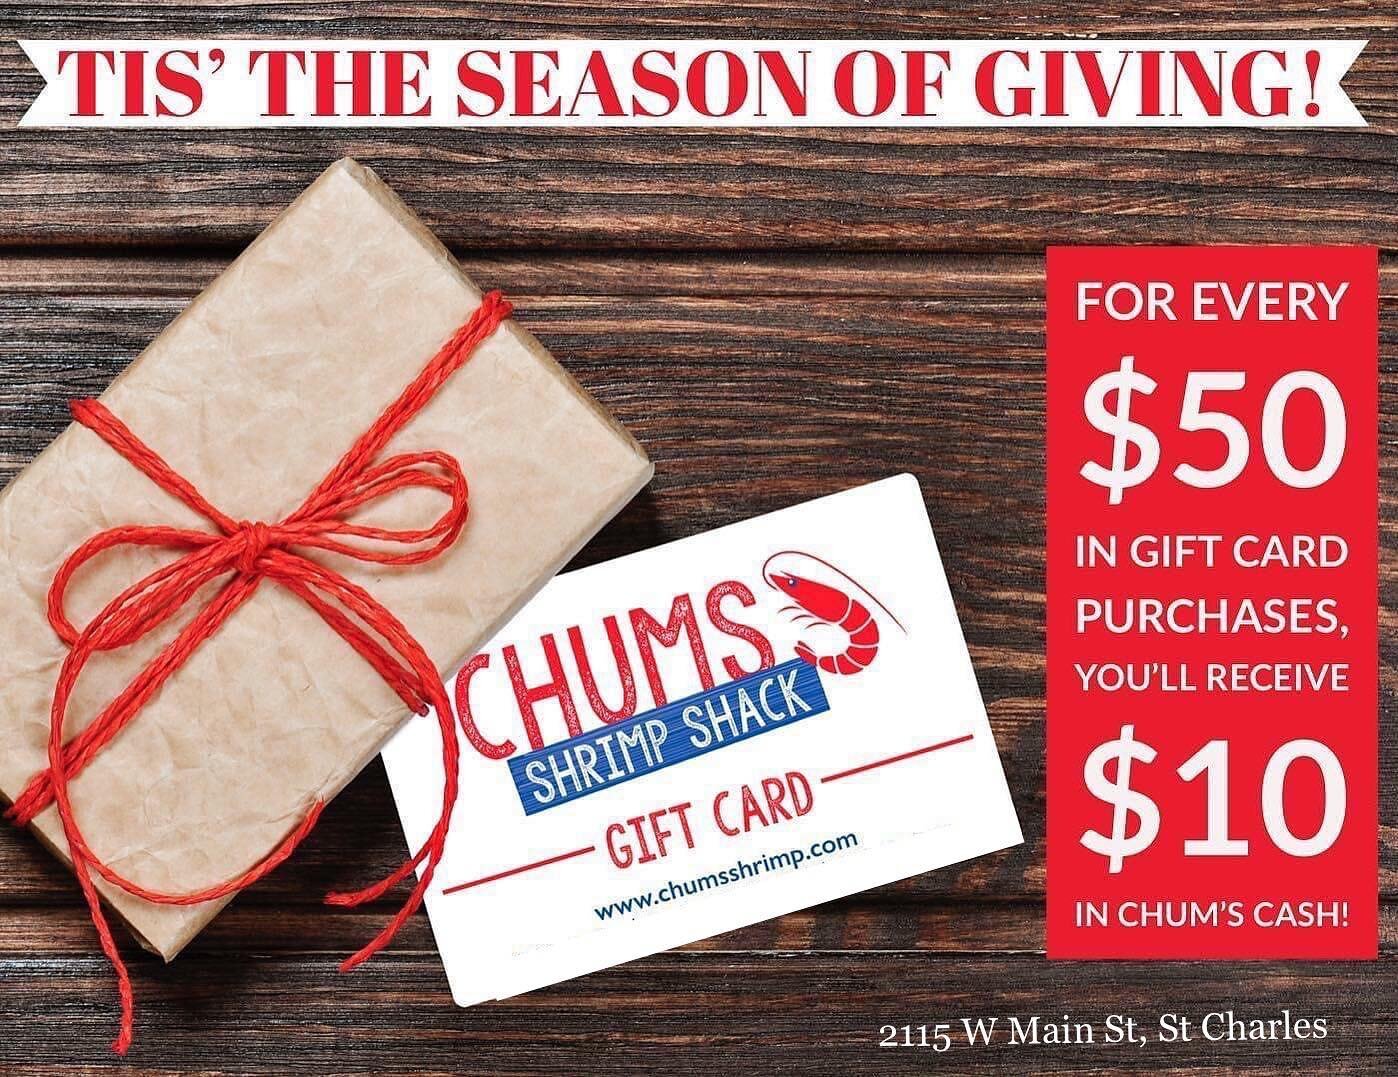 It&rsquo;s the holiday season, and what better gift than a Chums Gift Certificate! Special offer for our customers now through December 24th. For every $50 you spend on gift certificates, you'll receive a $10 Chum&rsquo;s CASH card! Spread the joy th